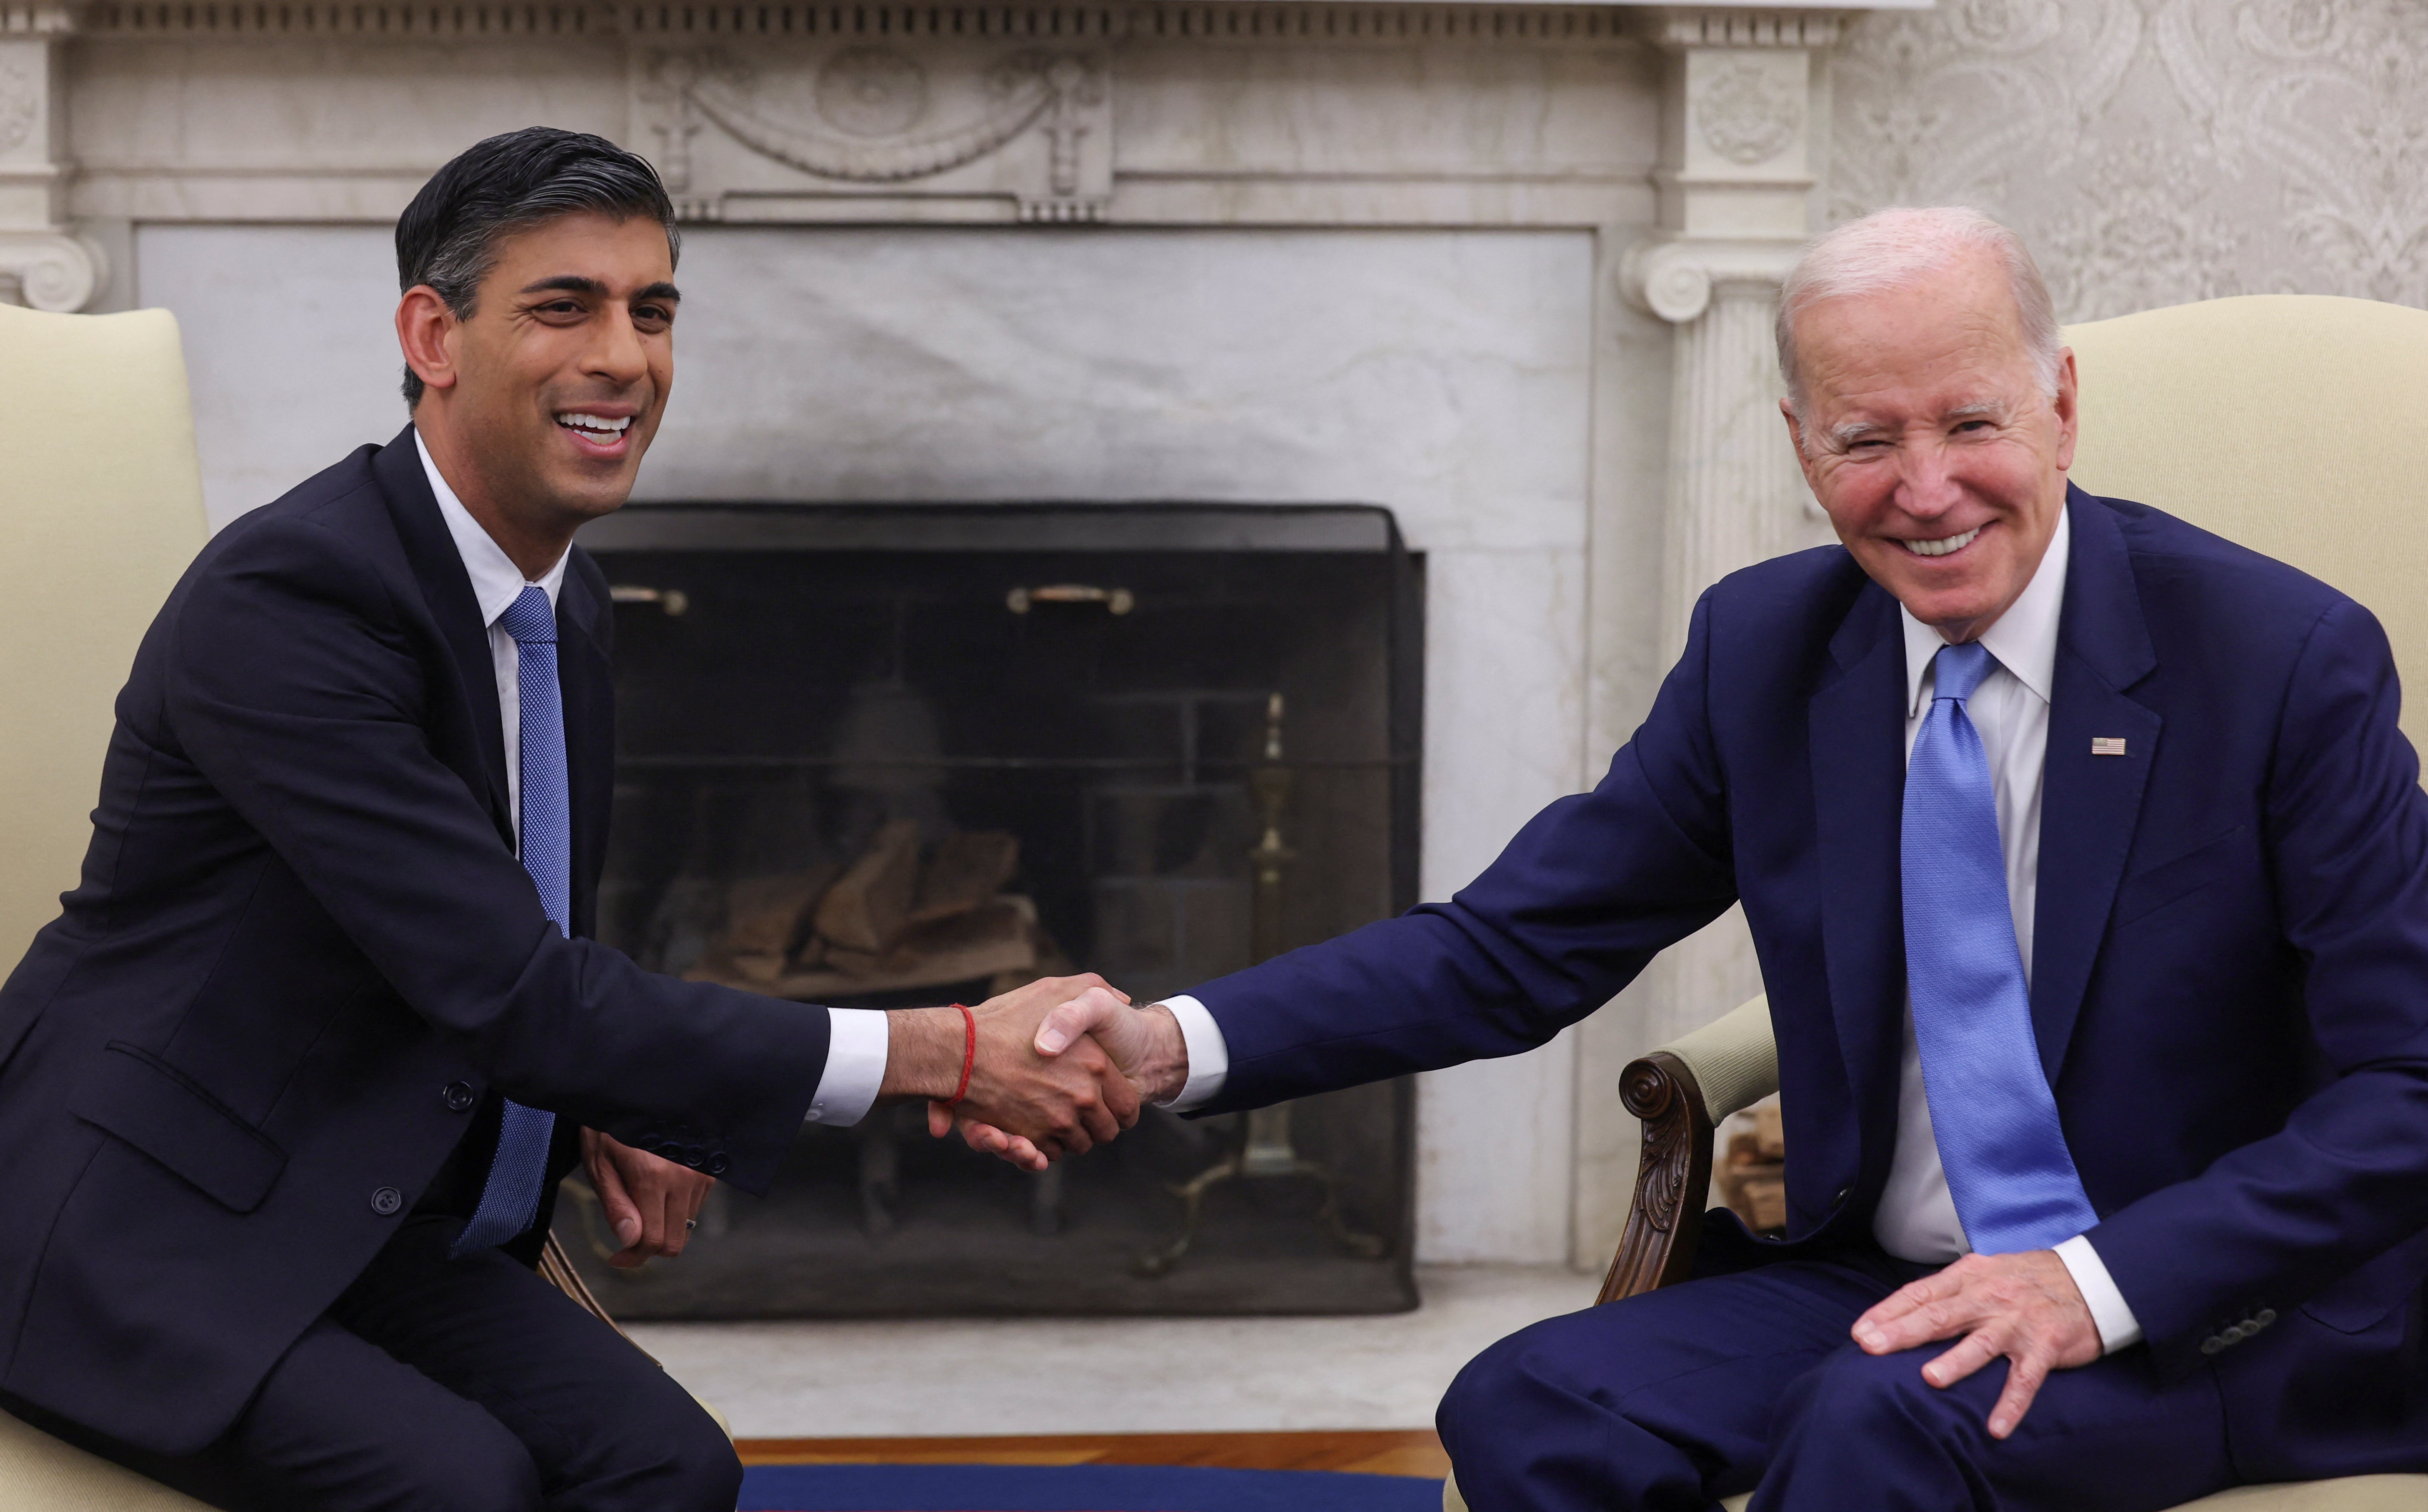 Joe Biden and Rishi Sunak in the Oval Office of the White House on Thursday